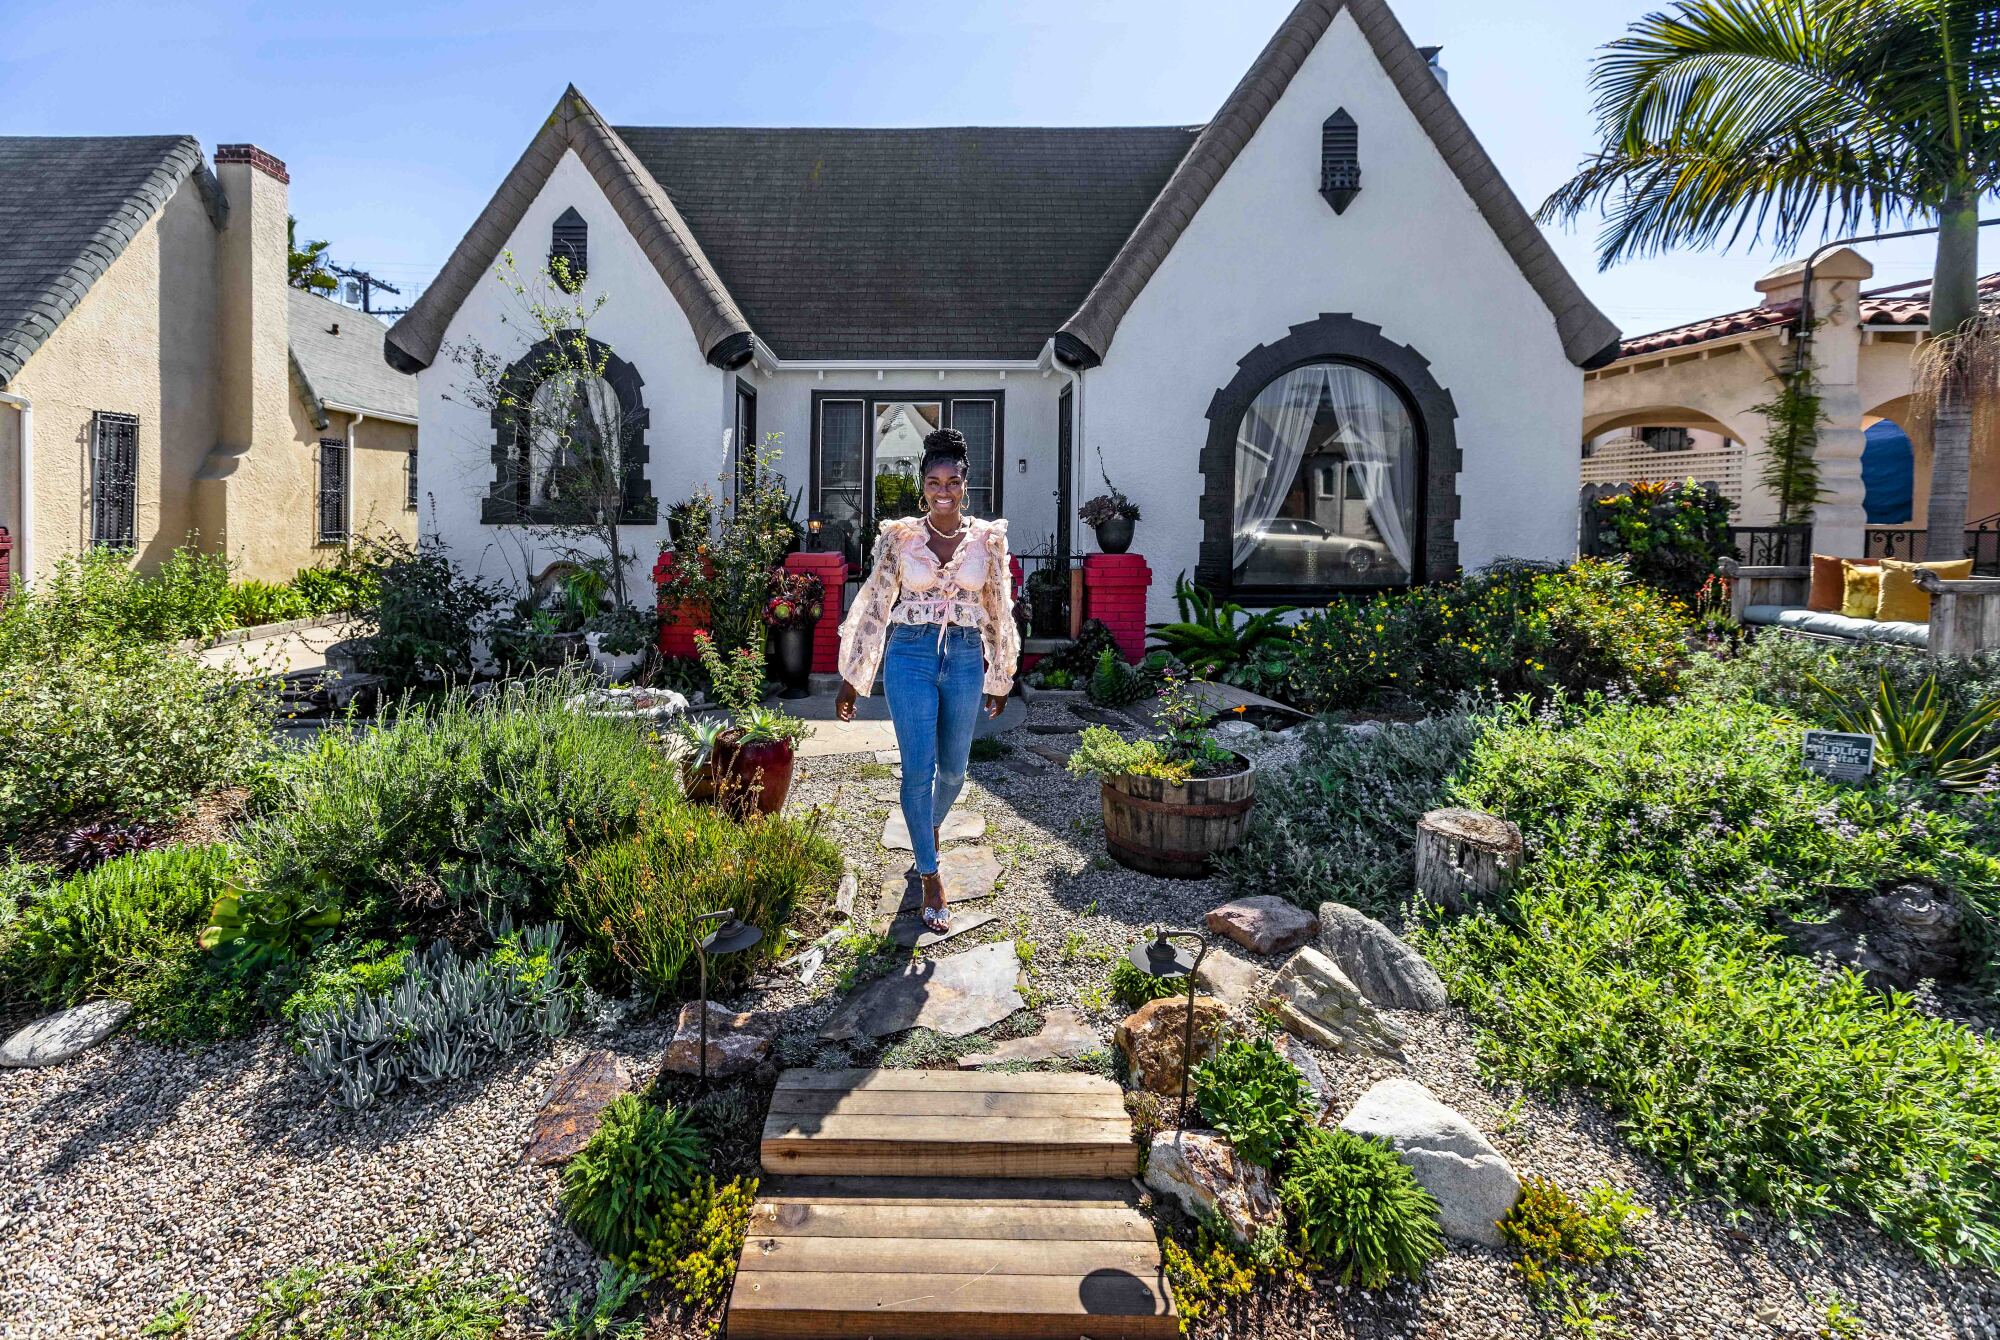 Brandy Williams stands in her front yard surrounded by a variety of plants.